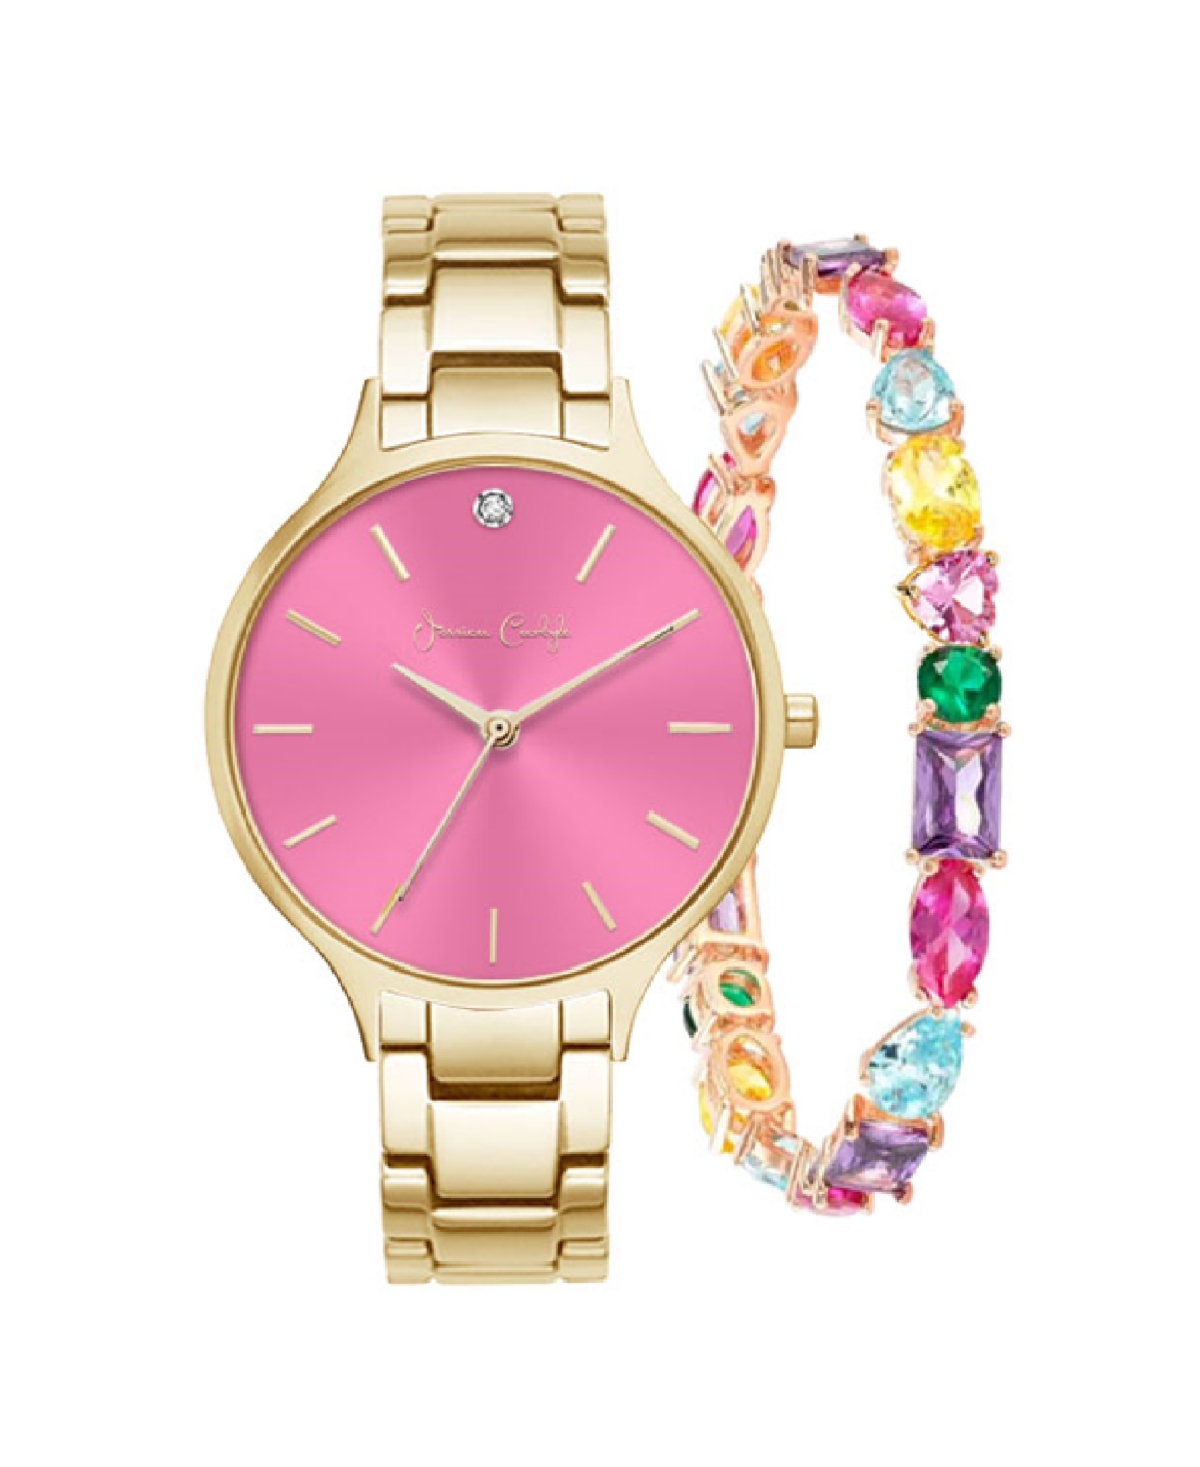 Jessica Carlyle Women's Quartz Gold-tone Alloy Bracelet Watch 36mm Gift Set In Shiny Gold,pink Sunray